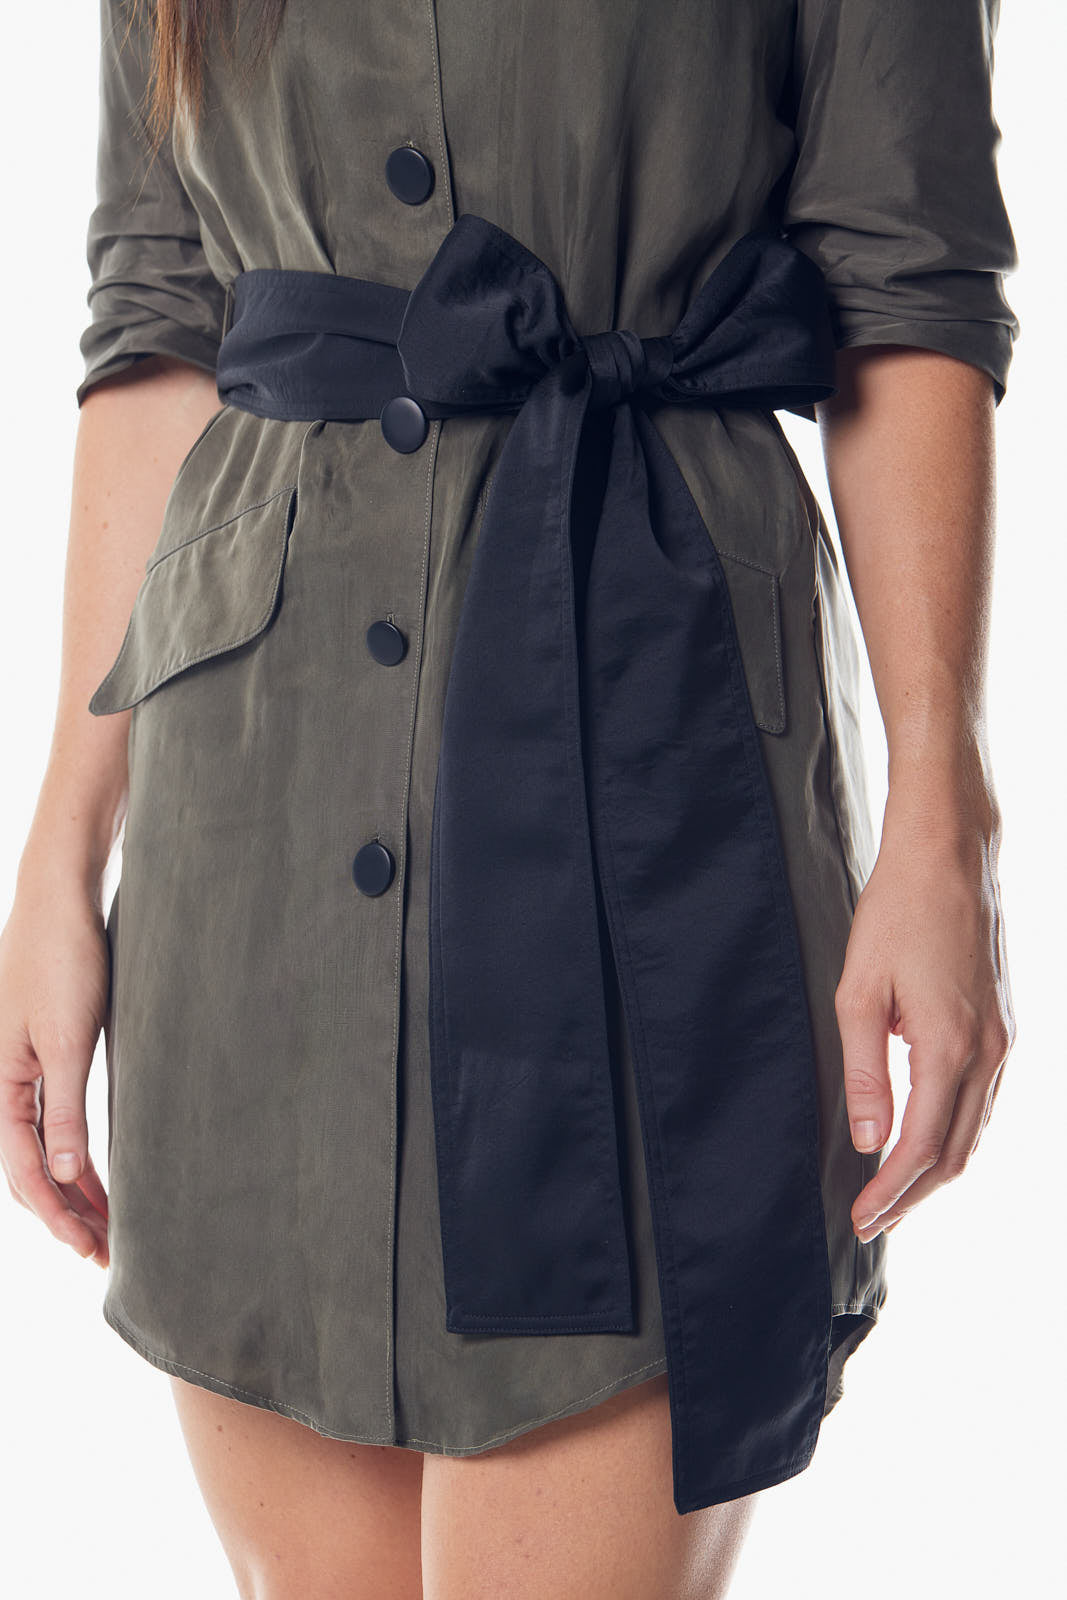  Montagna Green Blazer Dress - Elevate Your Confidence with Le Réussi